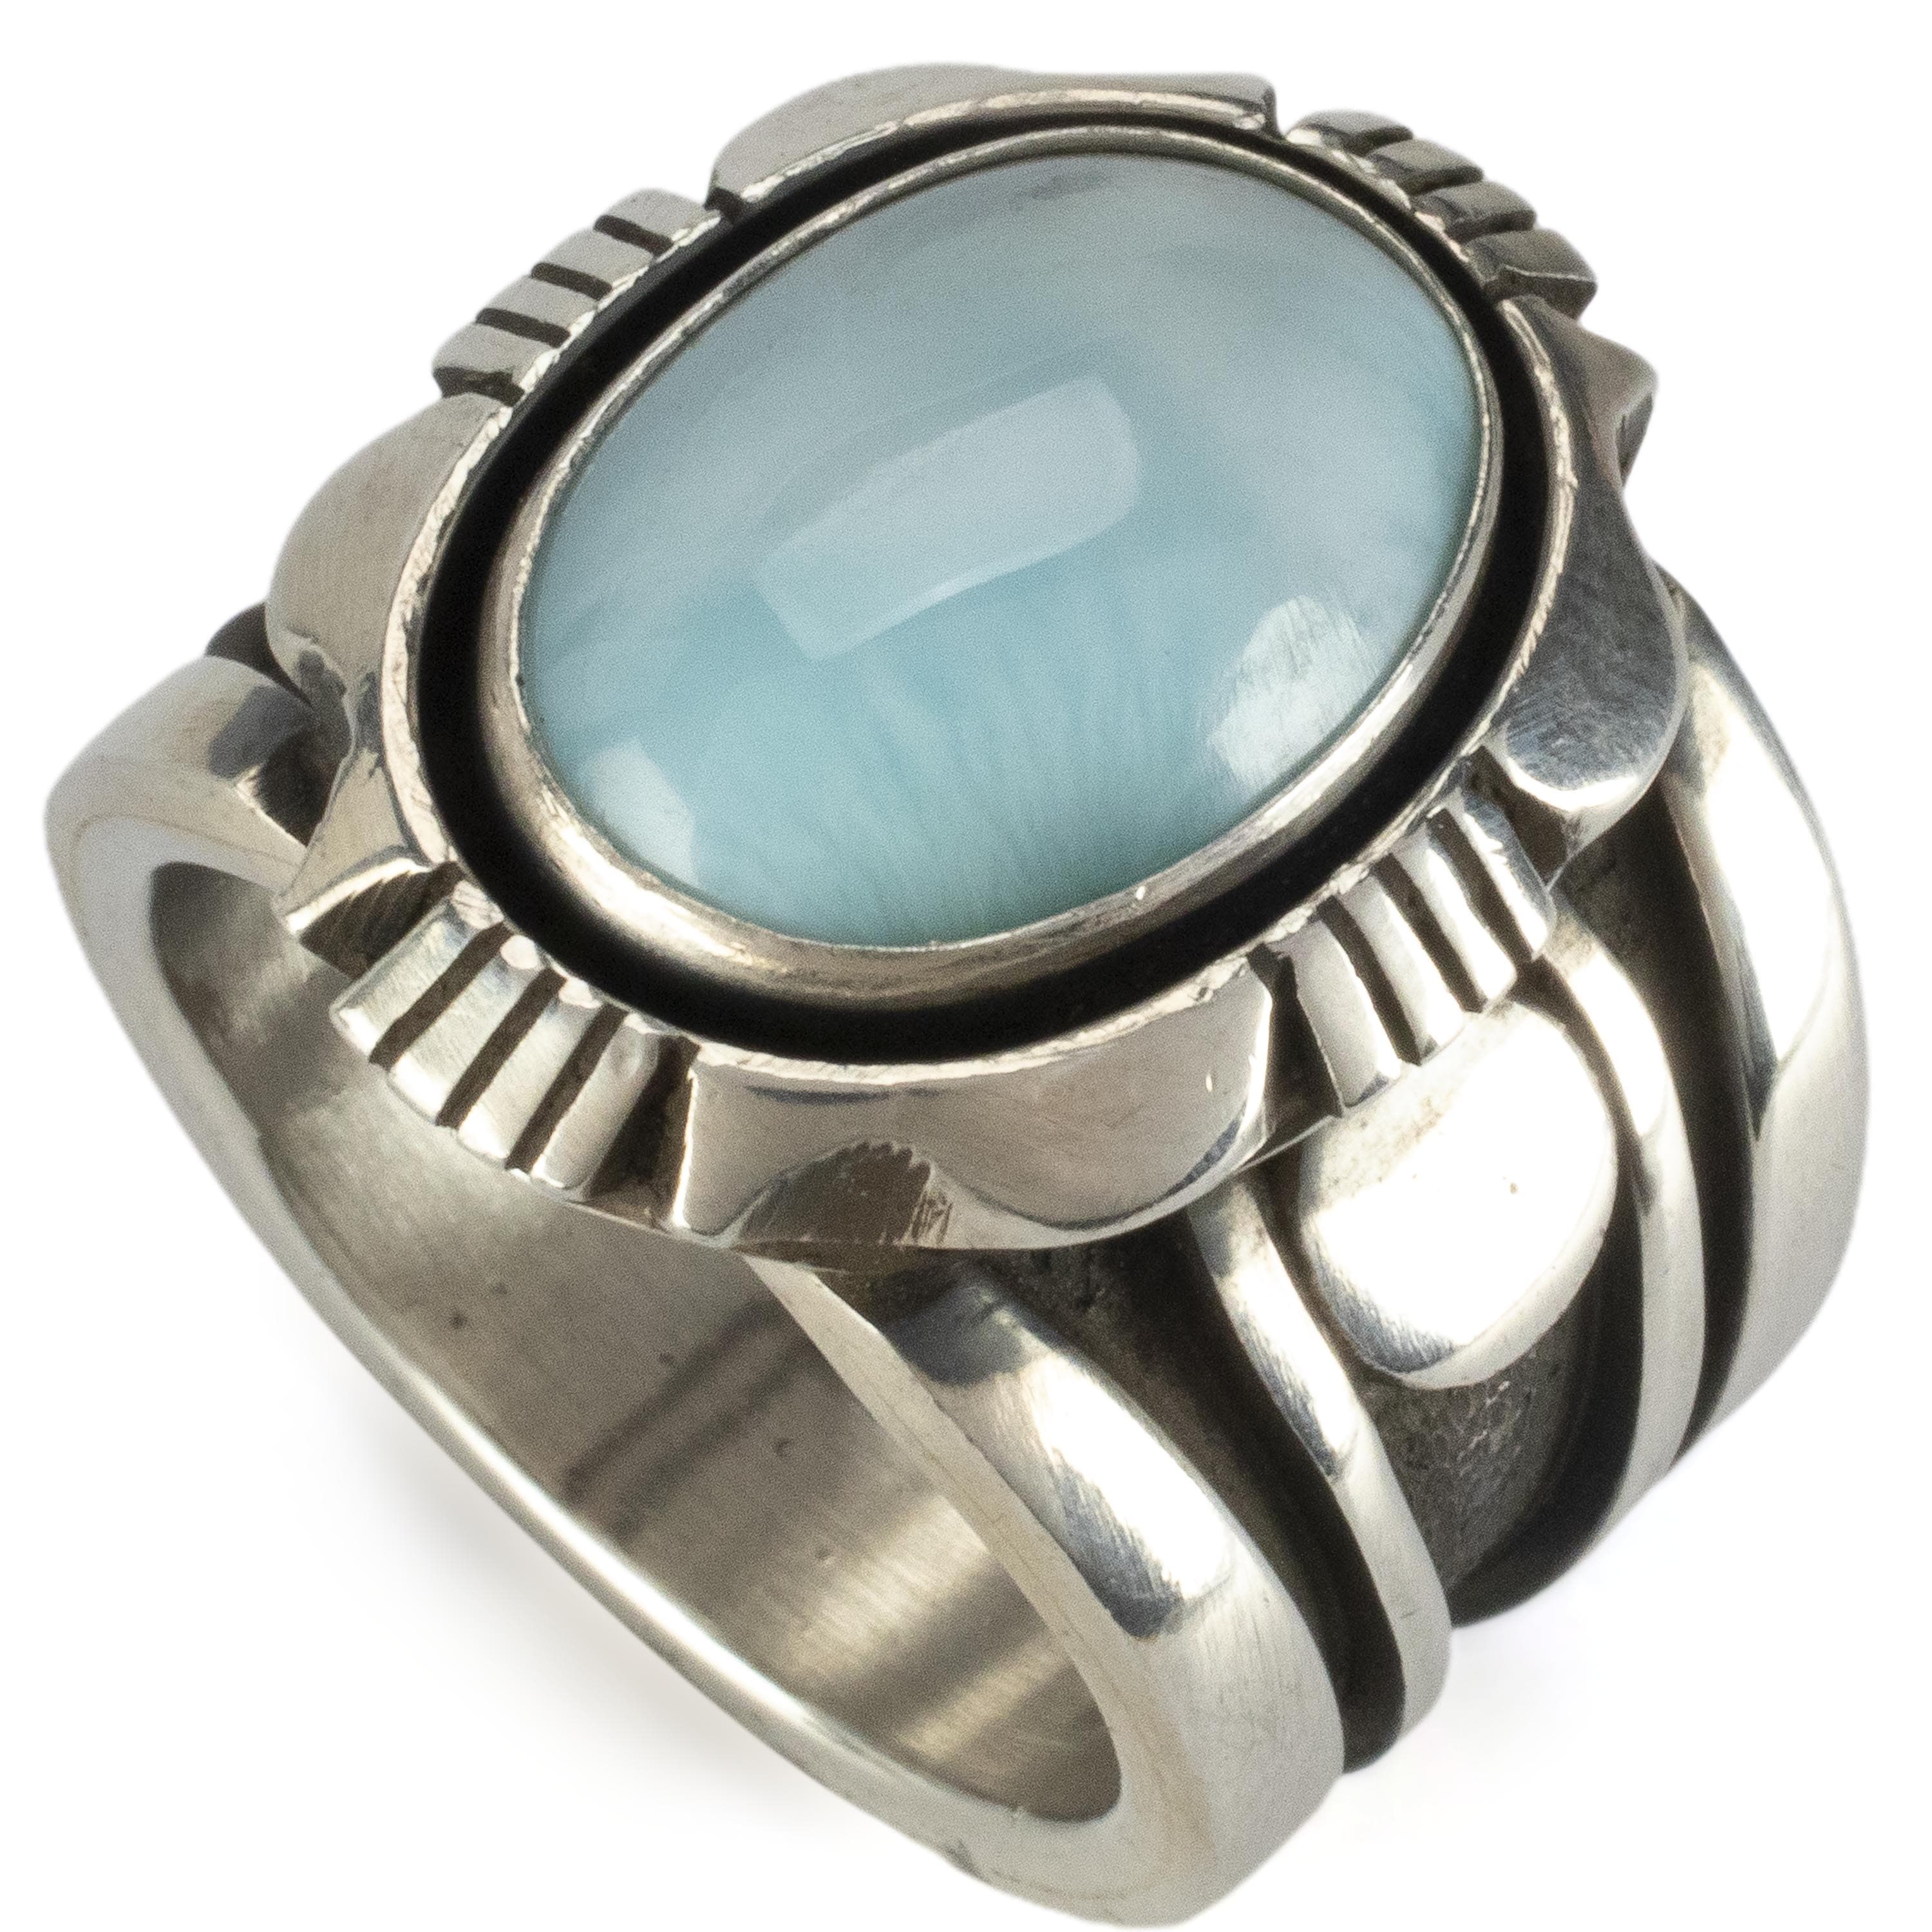 Kalifano Native American Jewelry Cooper Willie Navajo Larimar USA Native American Made 925 Sterling Silver Ring